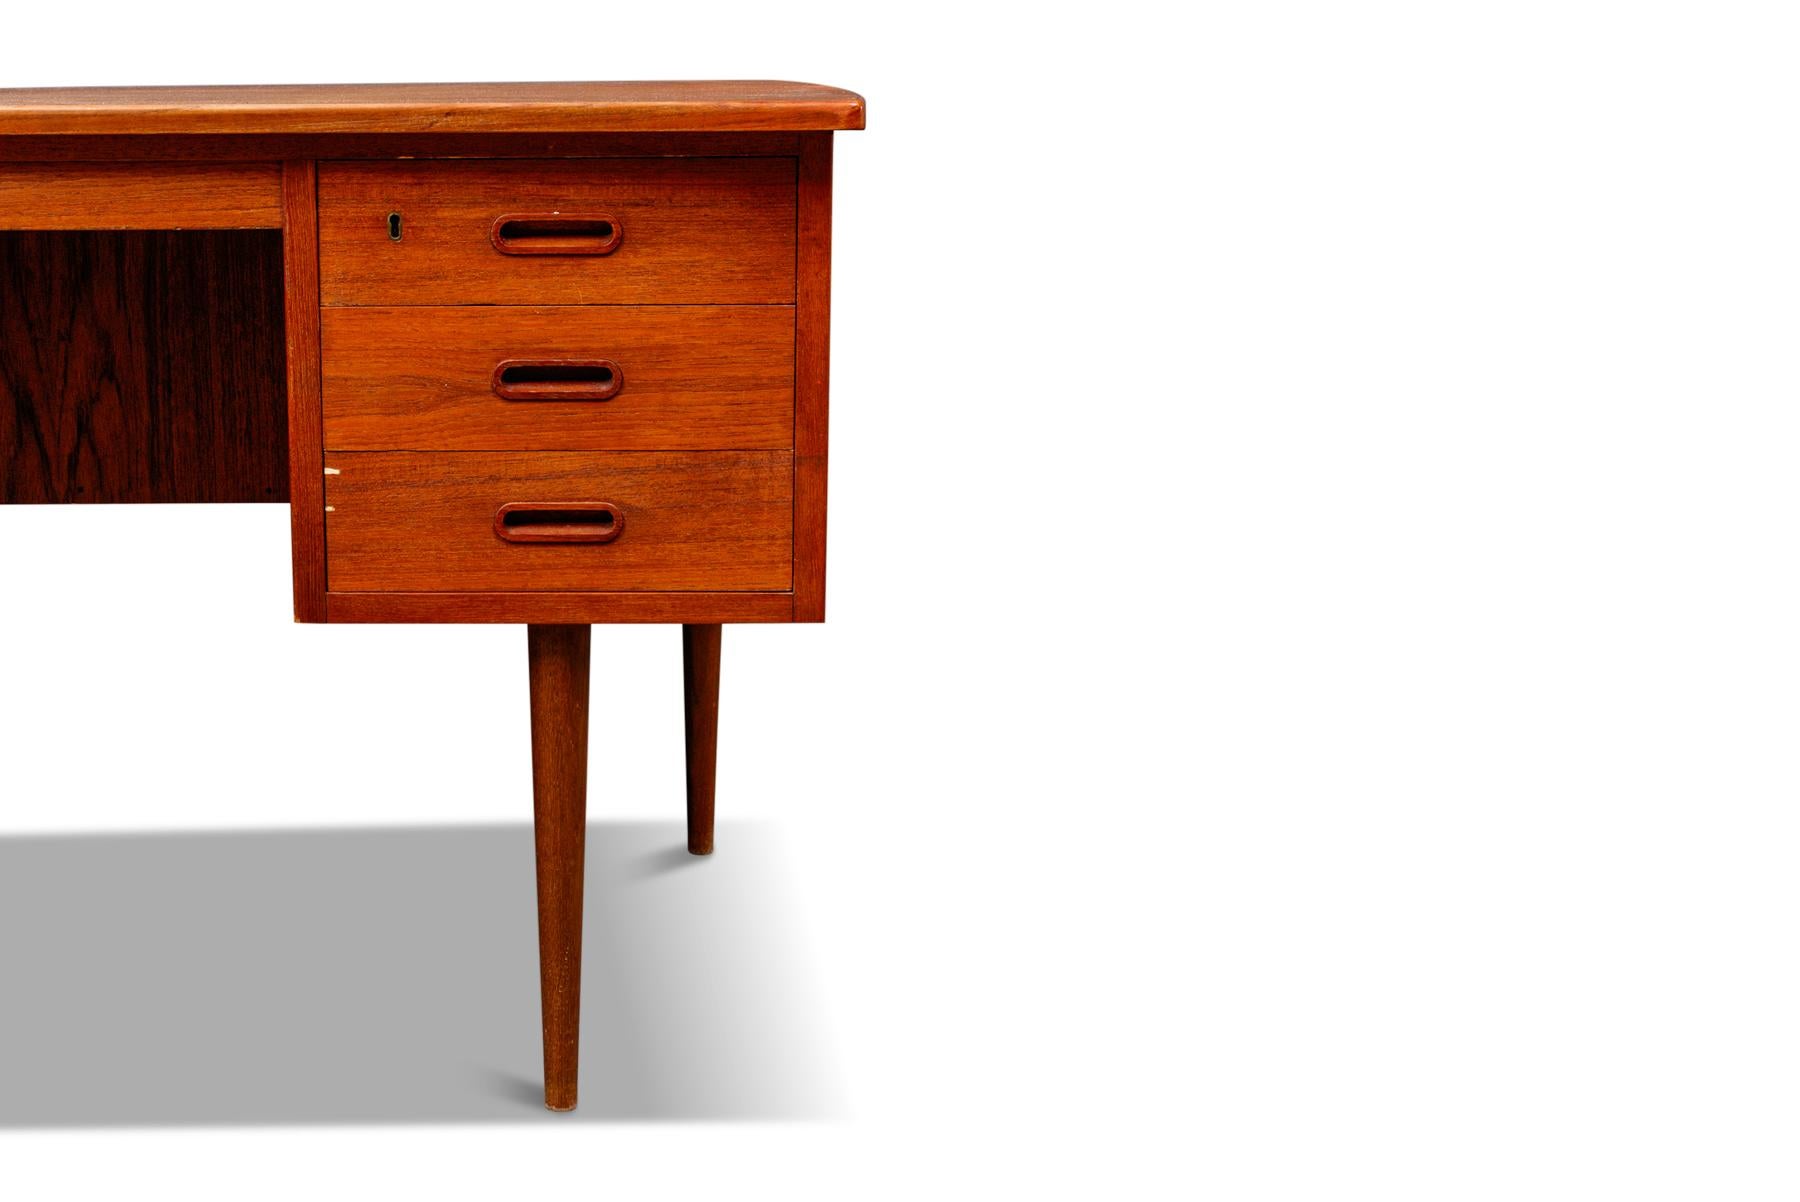 Origin: Denmark
Designer: Unknown
Manufacturer: Unknown
Era: 1960s
Materials: Teak
Measurements: 53? wide x 29? deep x 29? tall

Condition:
In excellent original condition with light cosmetic wear. Price includes refinishing.